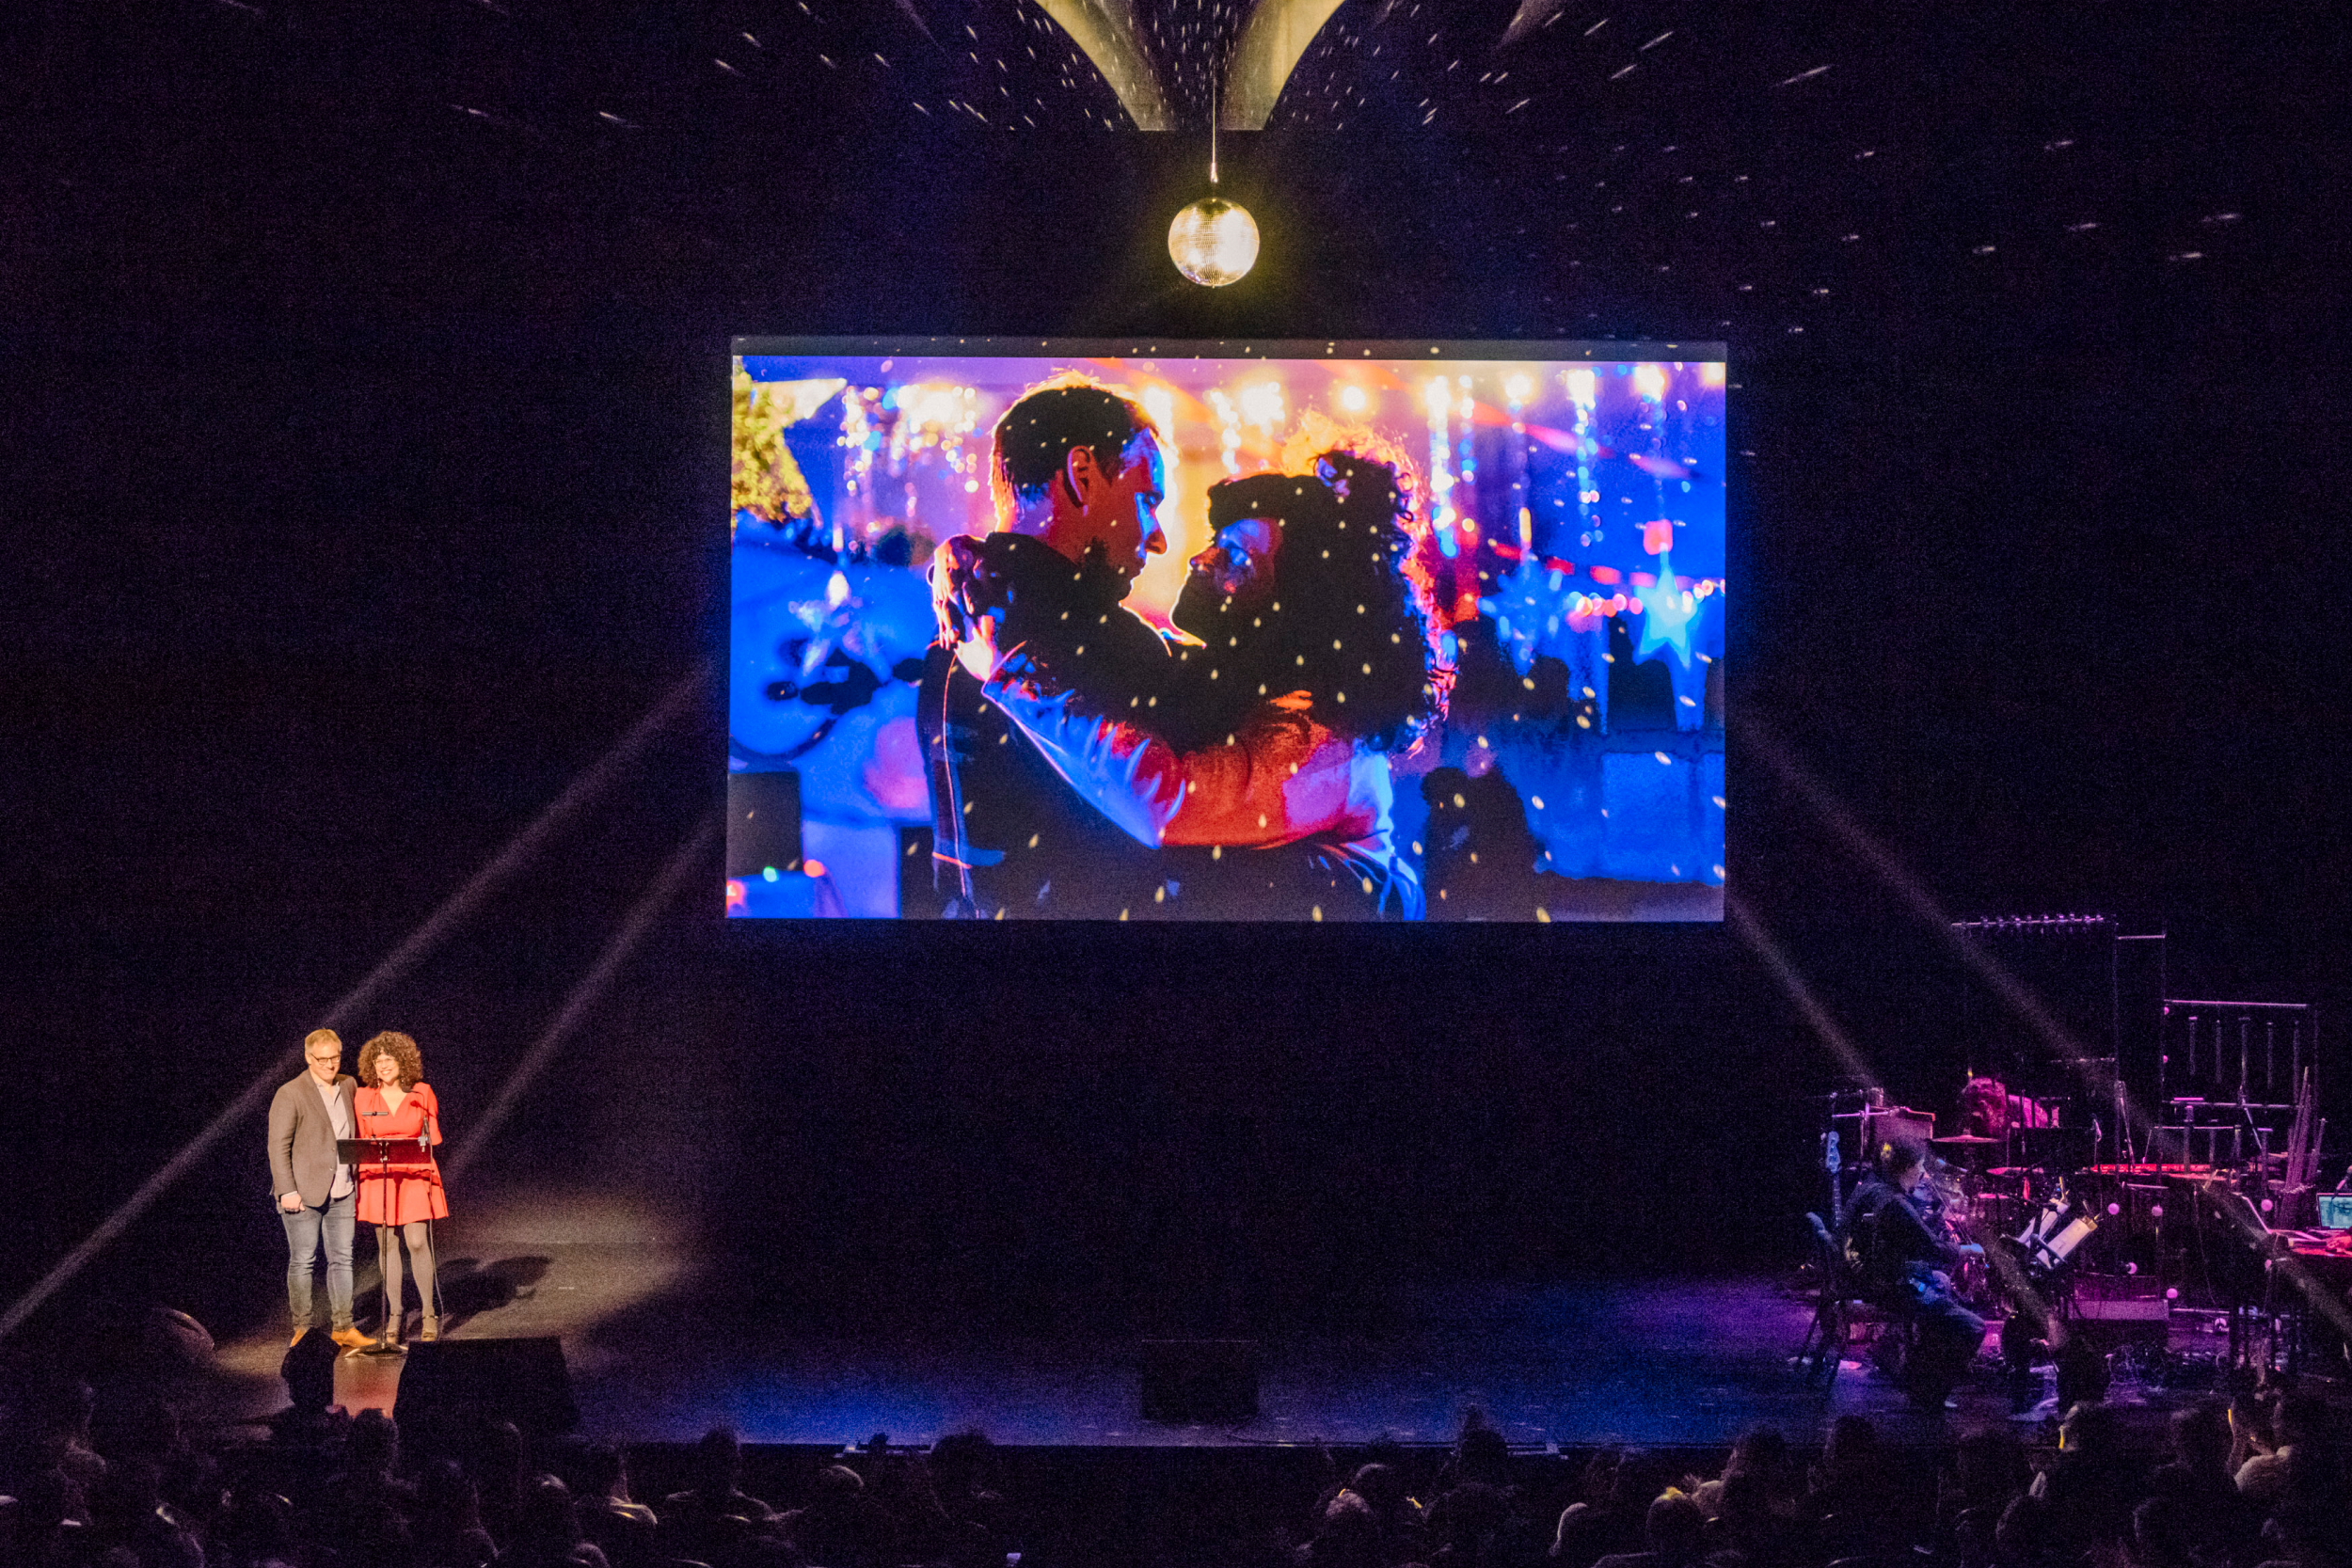 Cecilia Aldarondo and her husband perform on stage together in front of a screen with artwork of the two of them dancing.